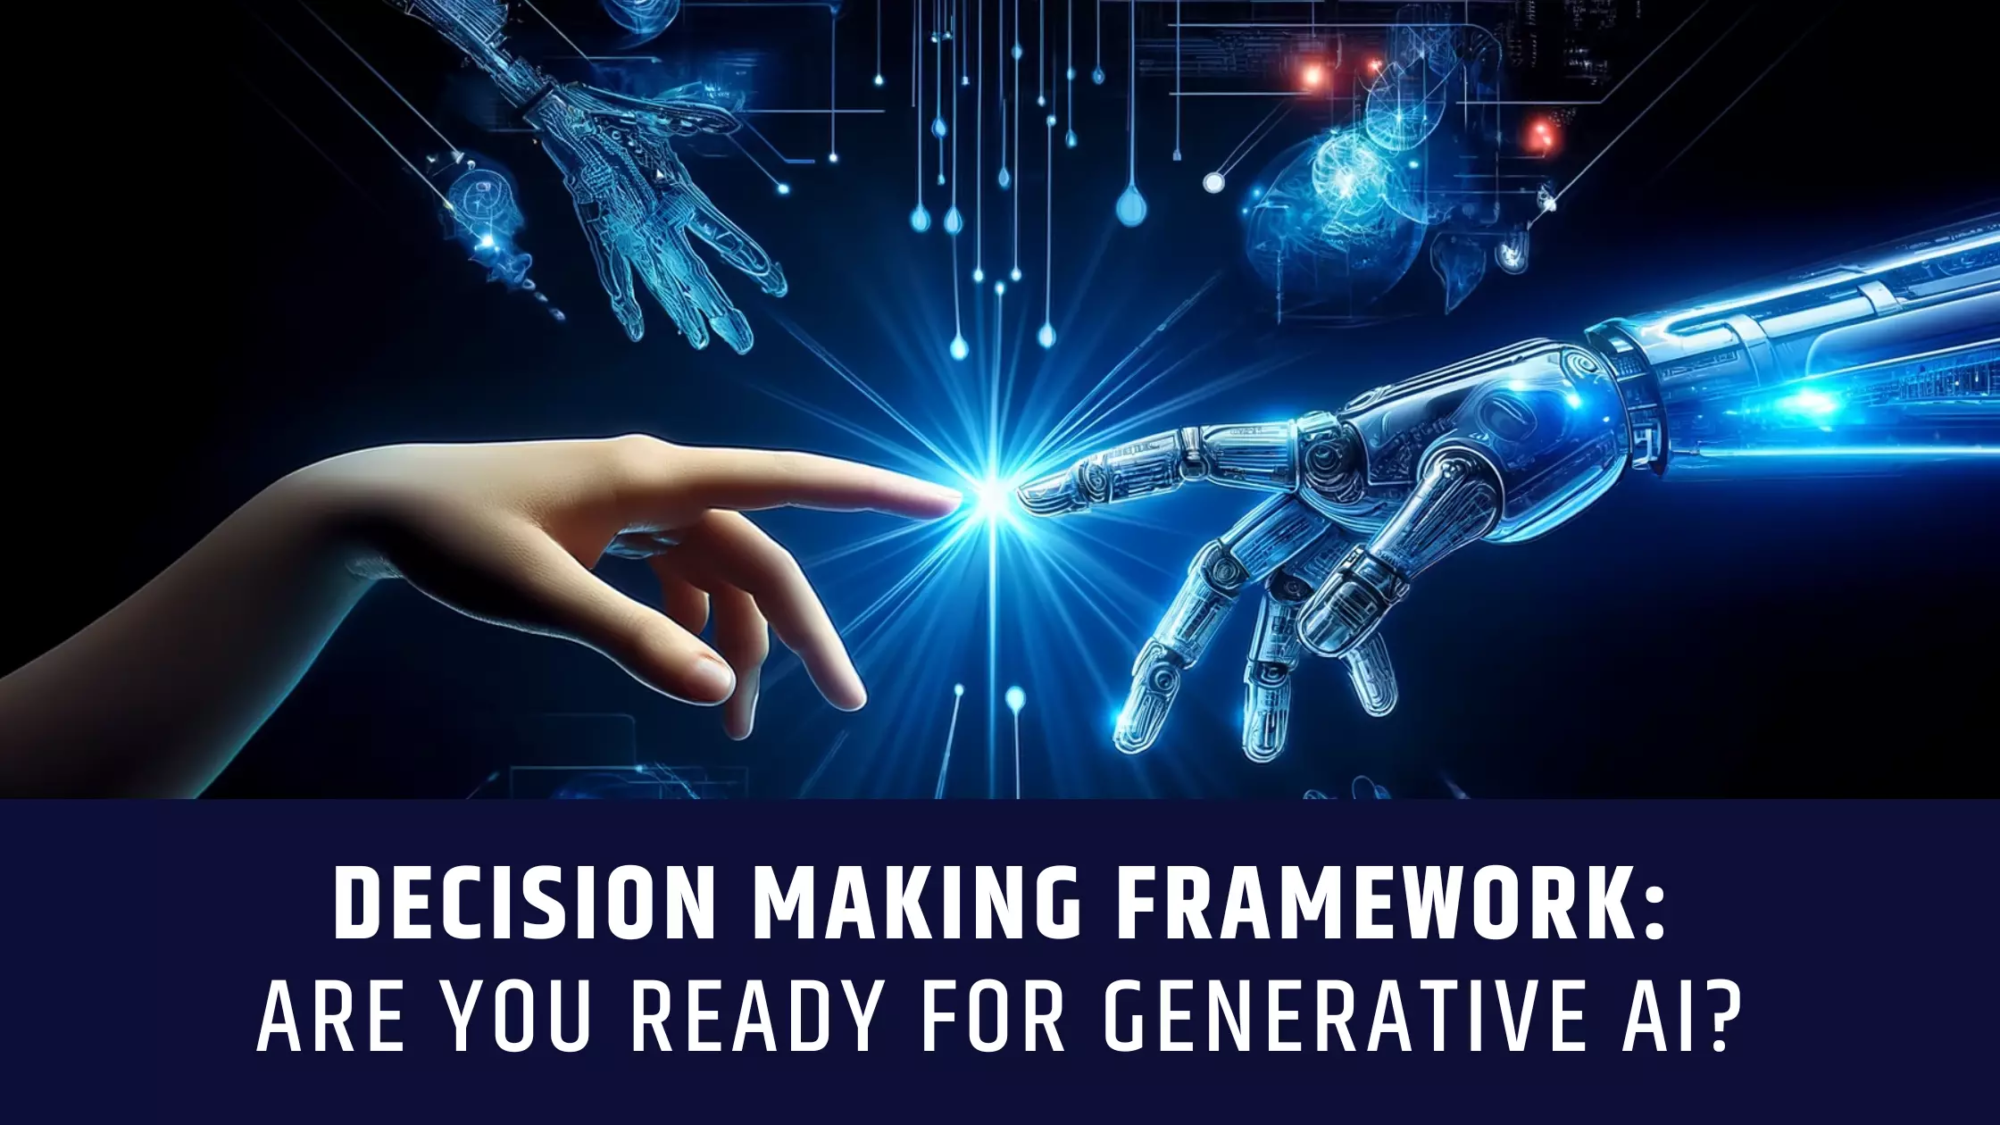 Decision Making Framework: Are You Ready for Generative AI?